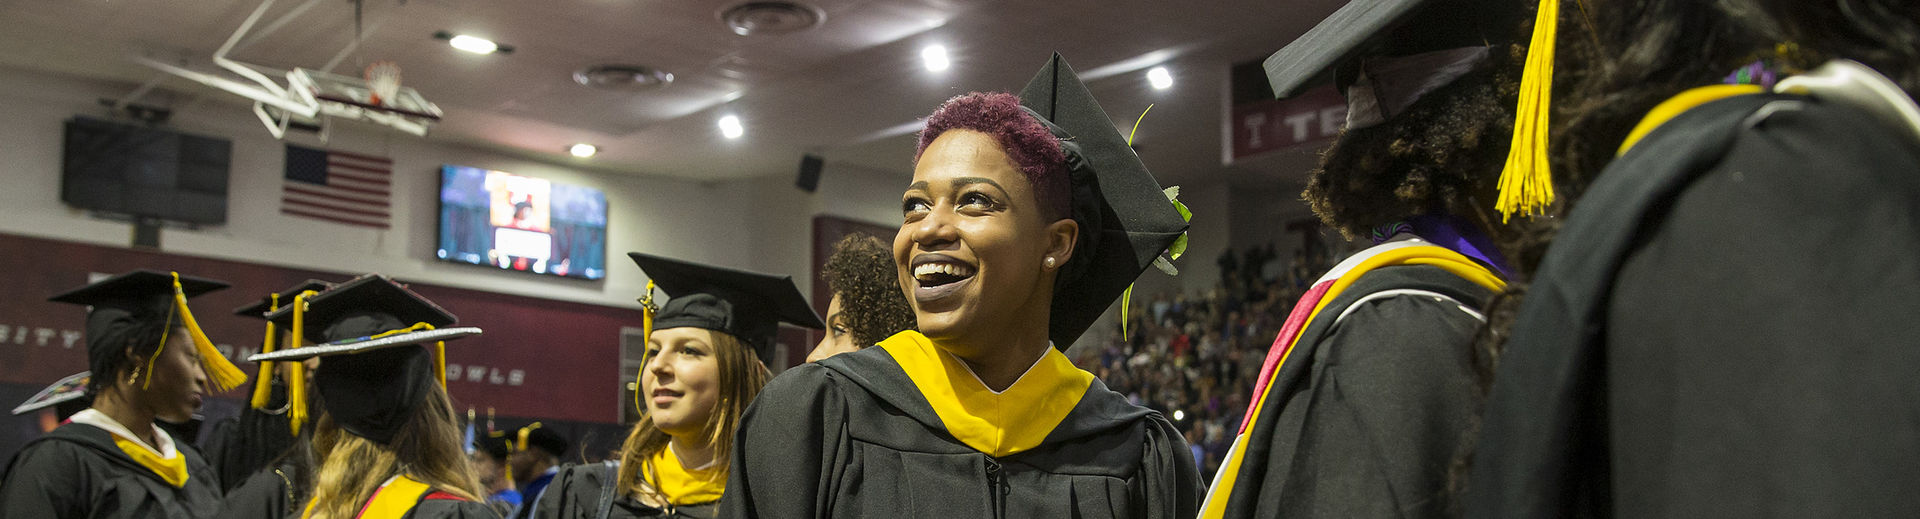 Temple graduates in cap and gown